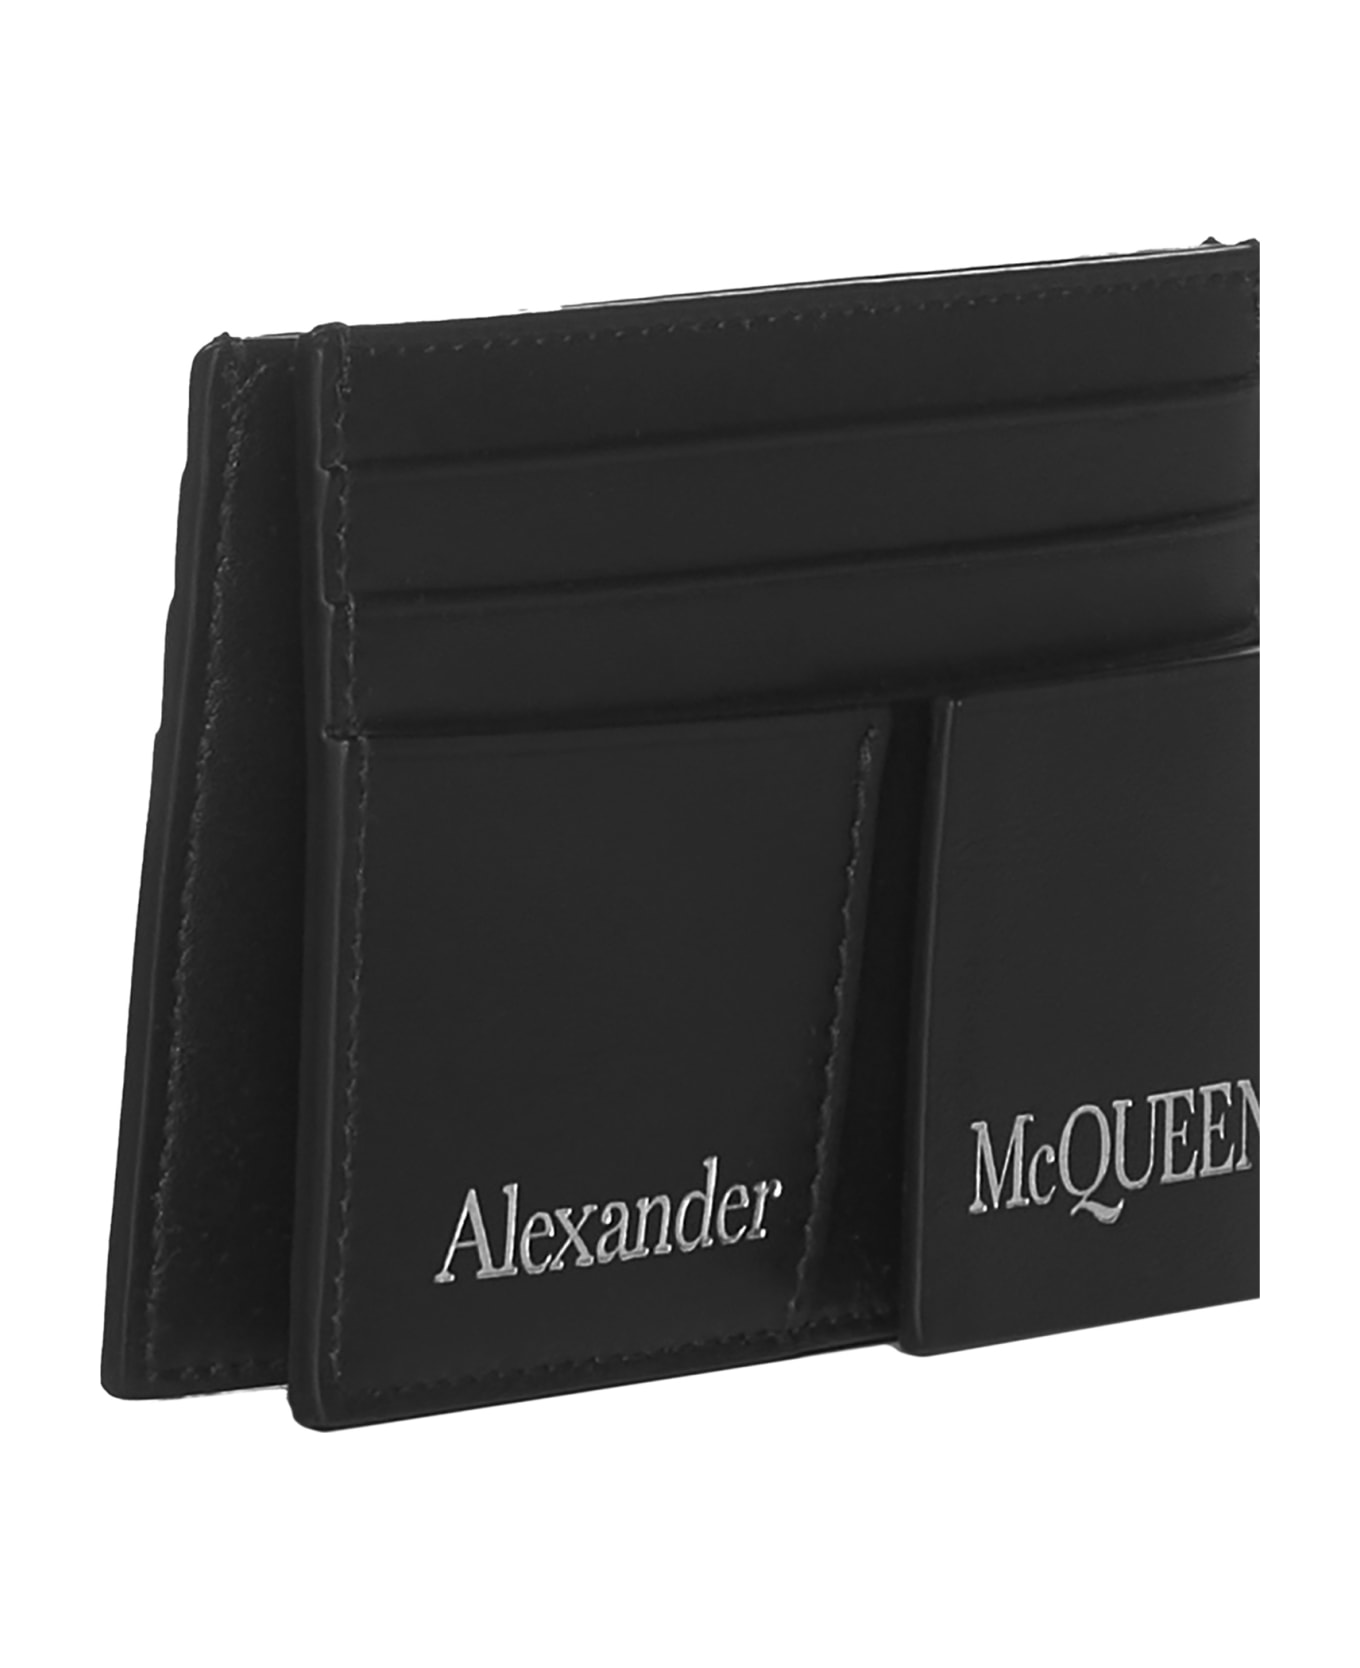 Alexander McQueen Double Card Holder In Black Leather With Logo - Nero 財布